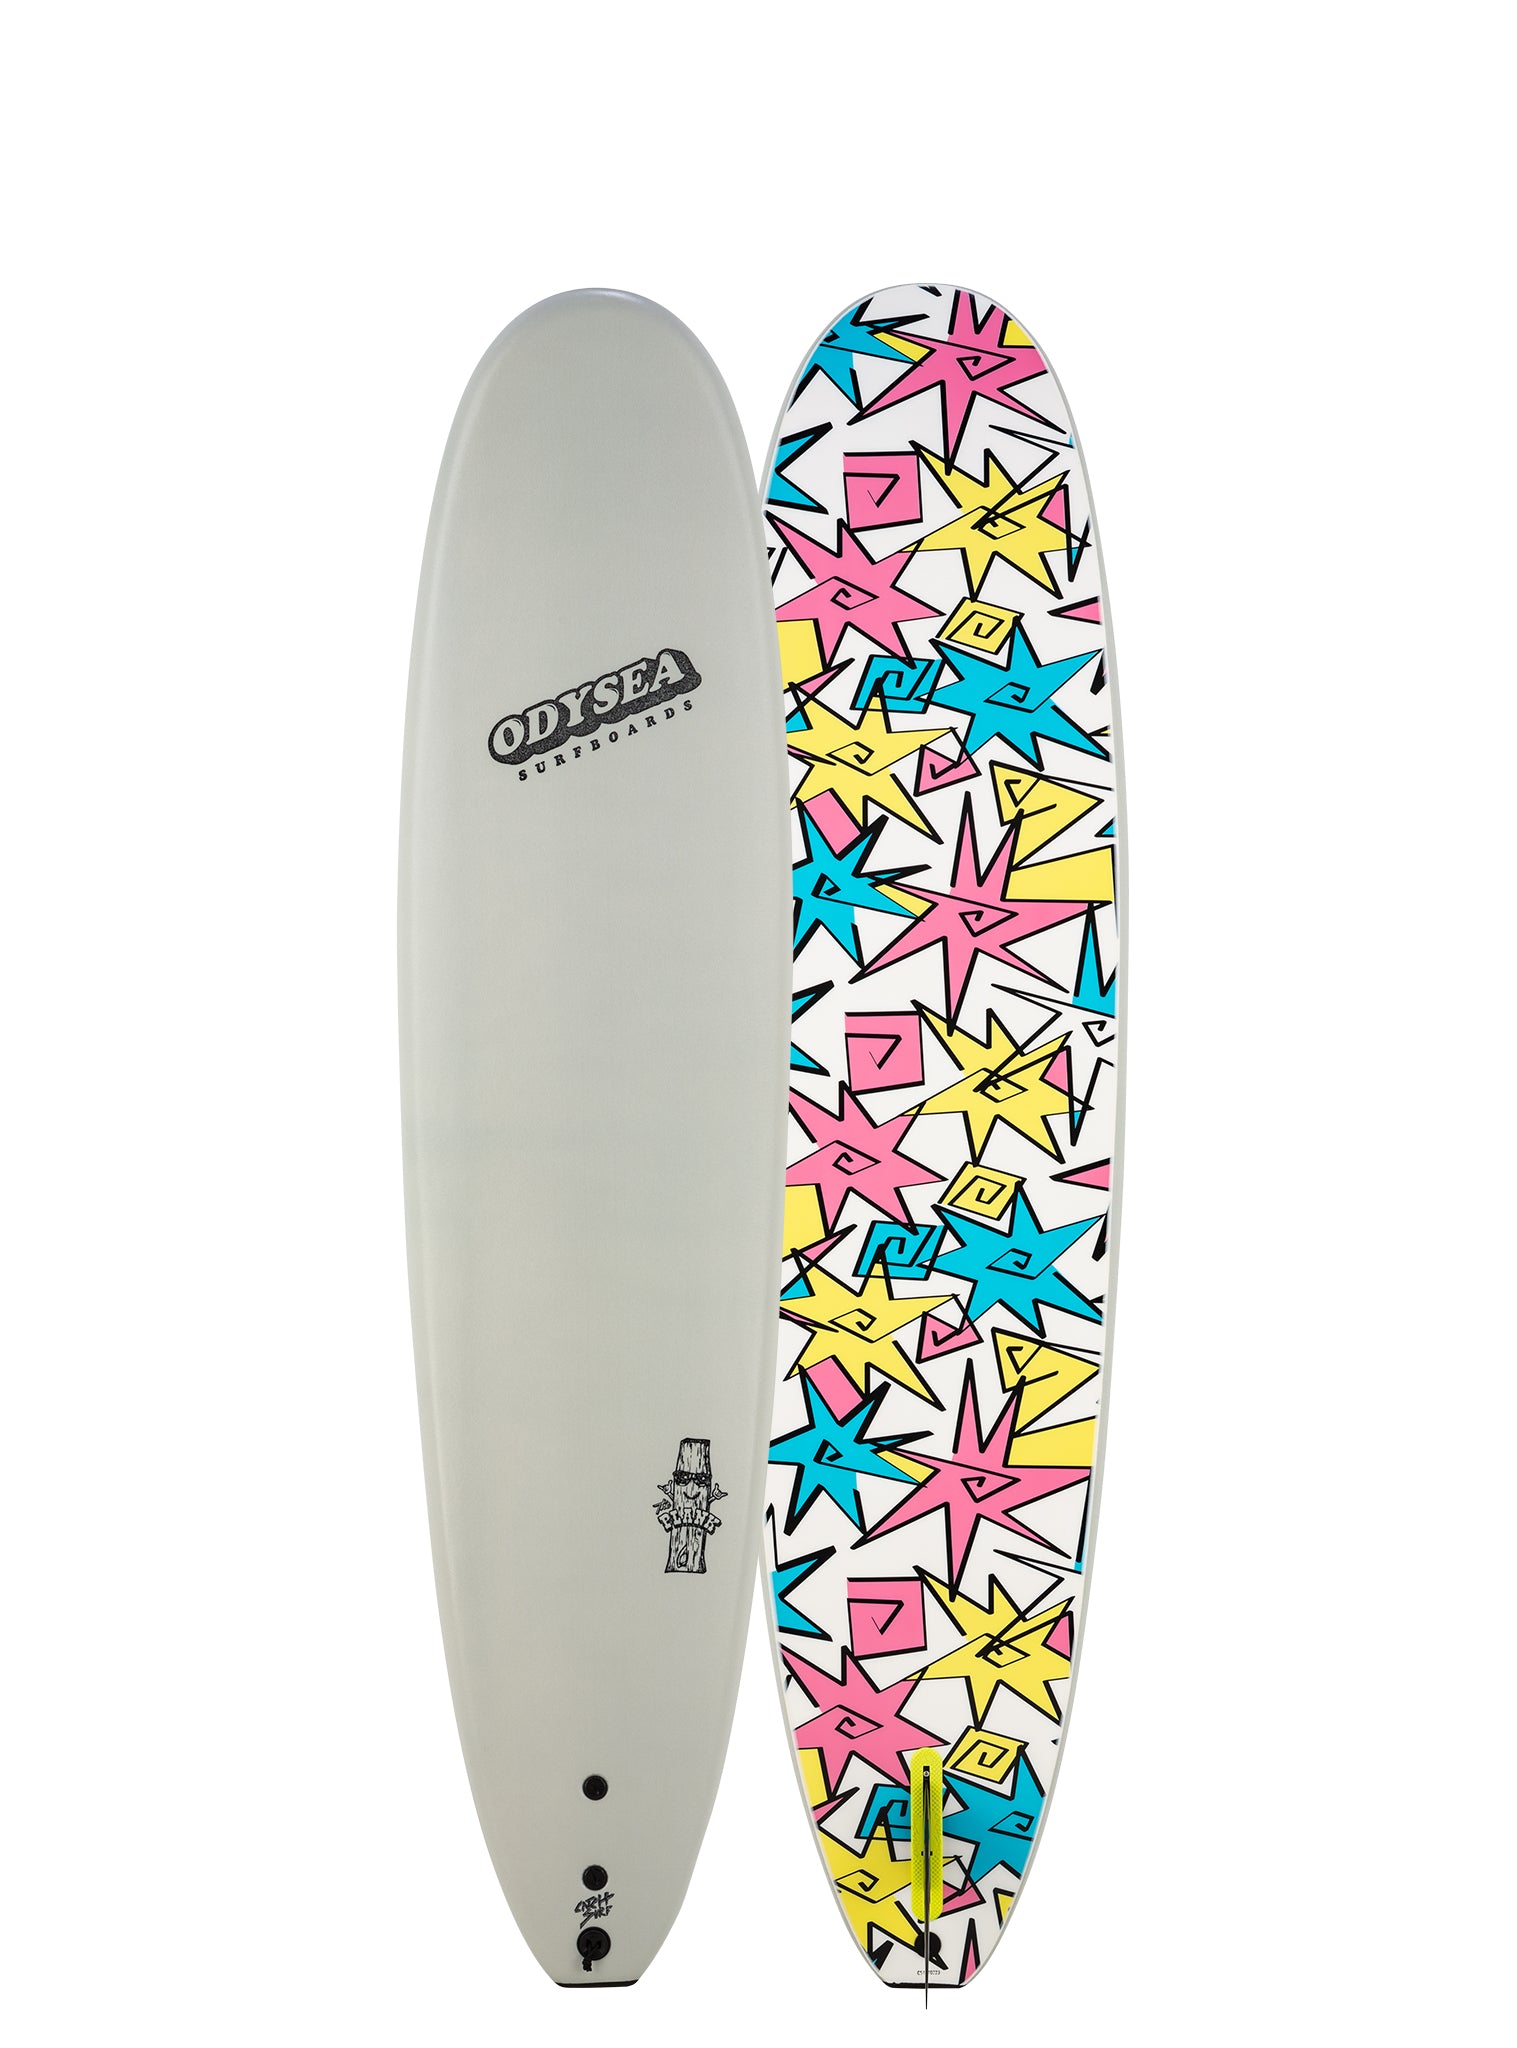 Plank // Single Fin / LIMITED EDITION